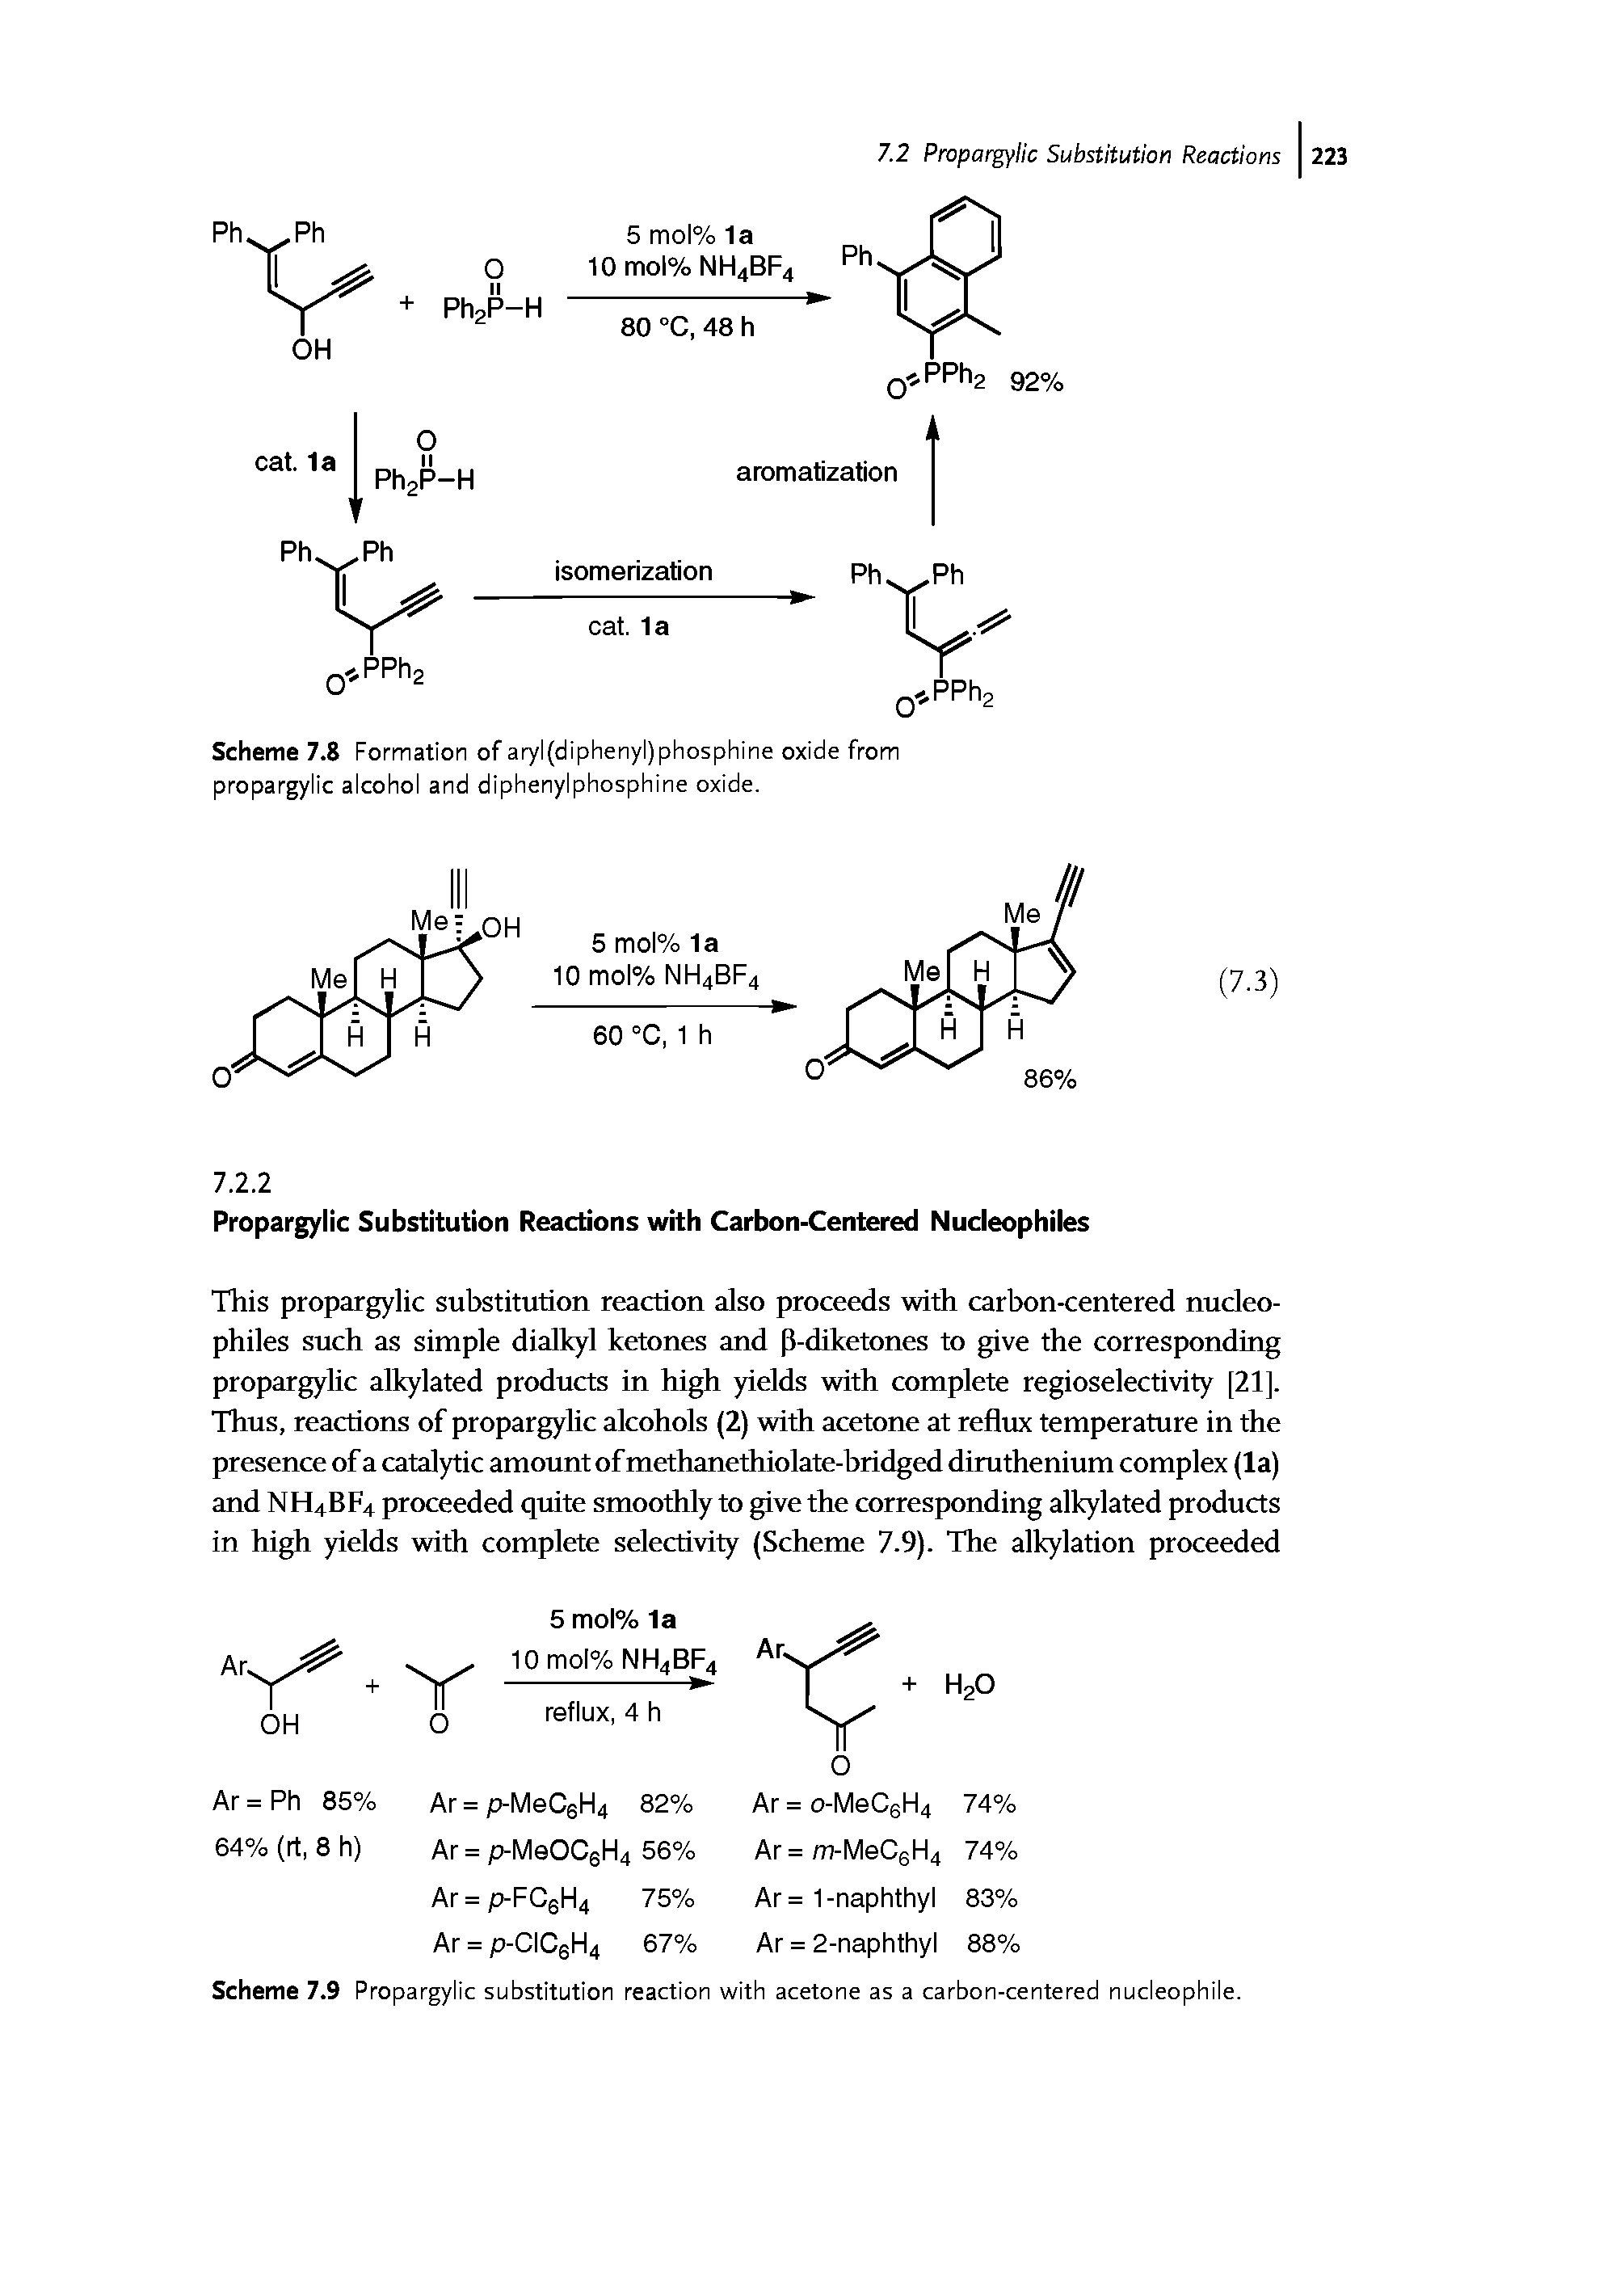 Scheme 7.9 Propargylic substitution reaction with acetone as a carbon-centered nucleophile.